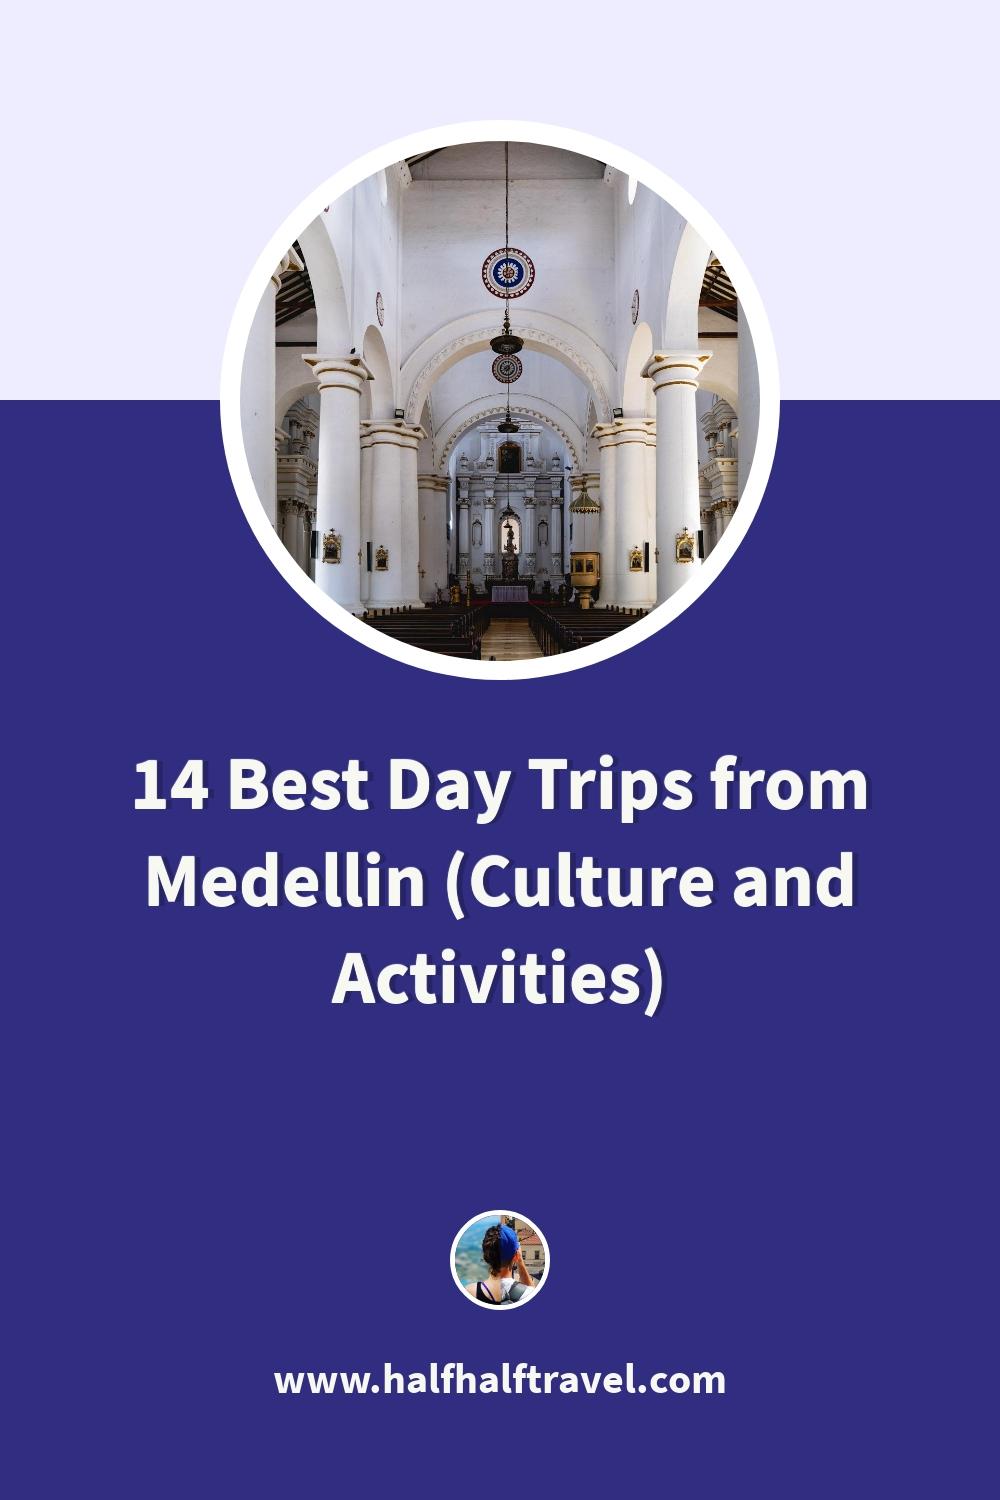 Pinterest image from the '14 Best Day Trips from Medellin (Culture and Activities)' article on Half Half Travel